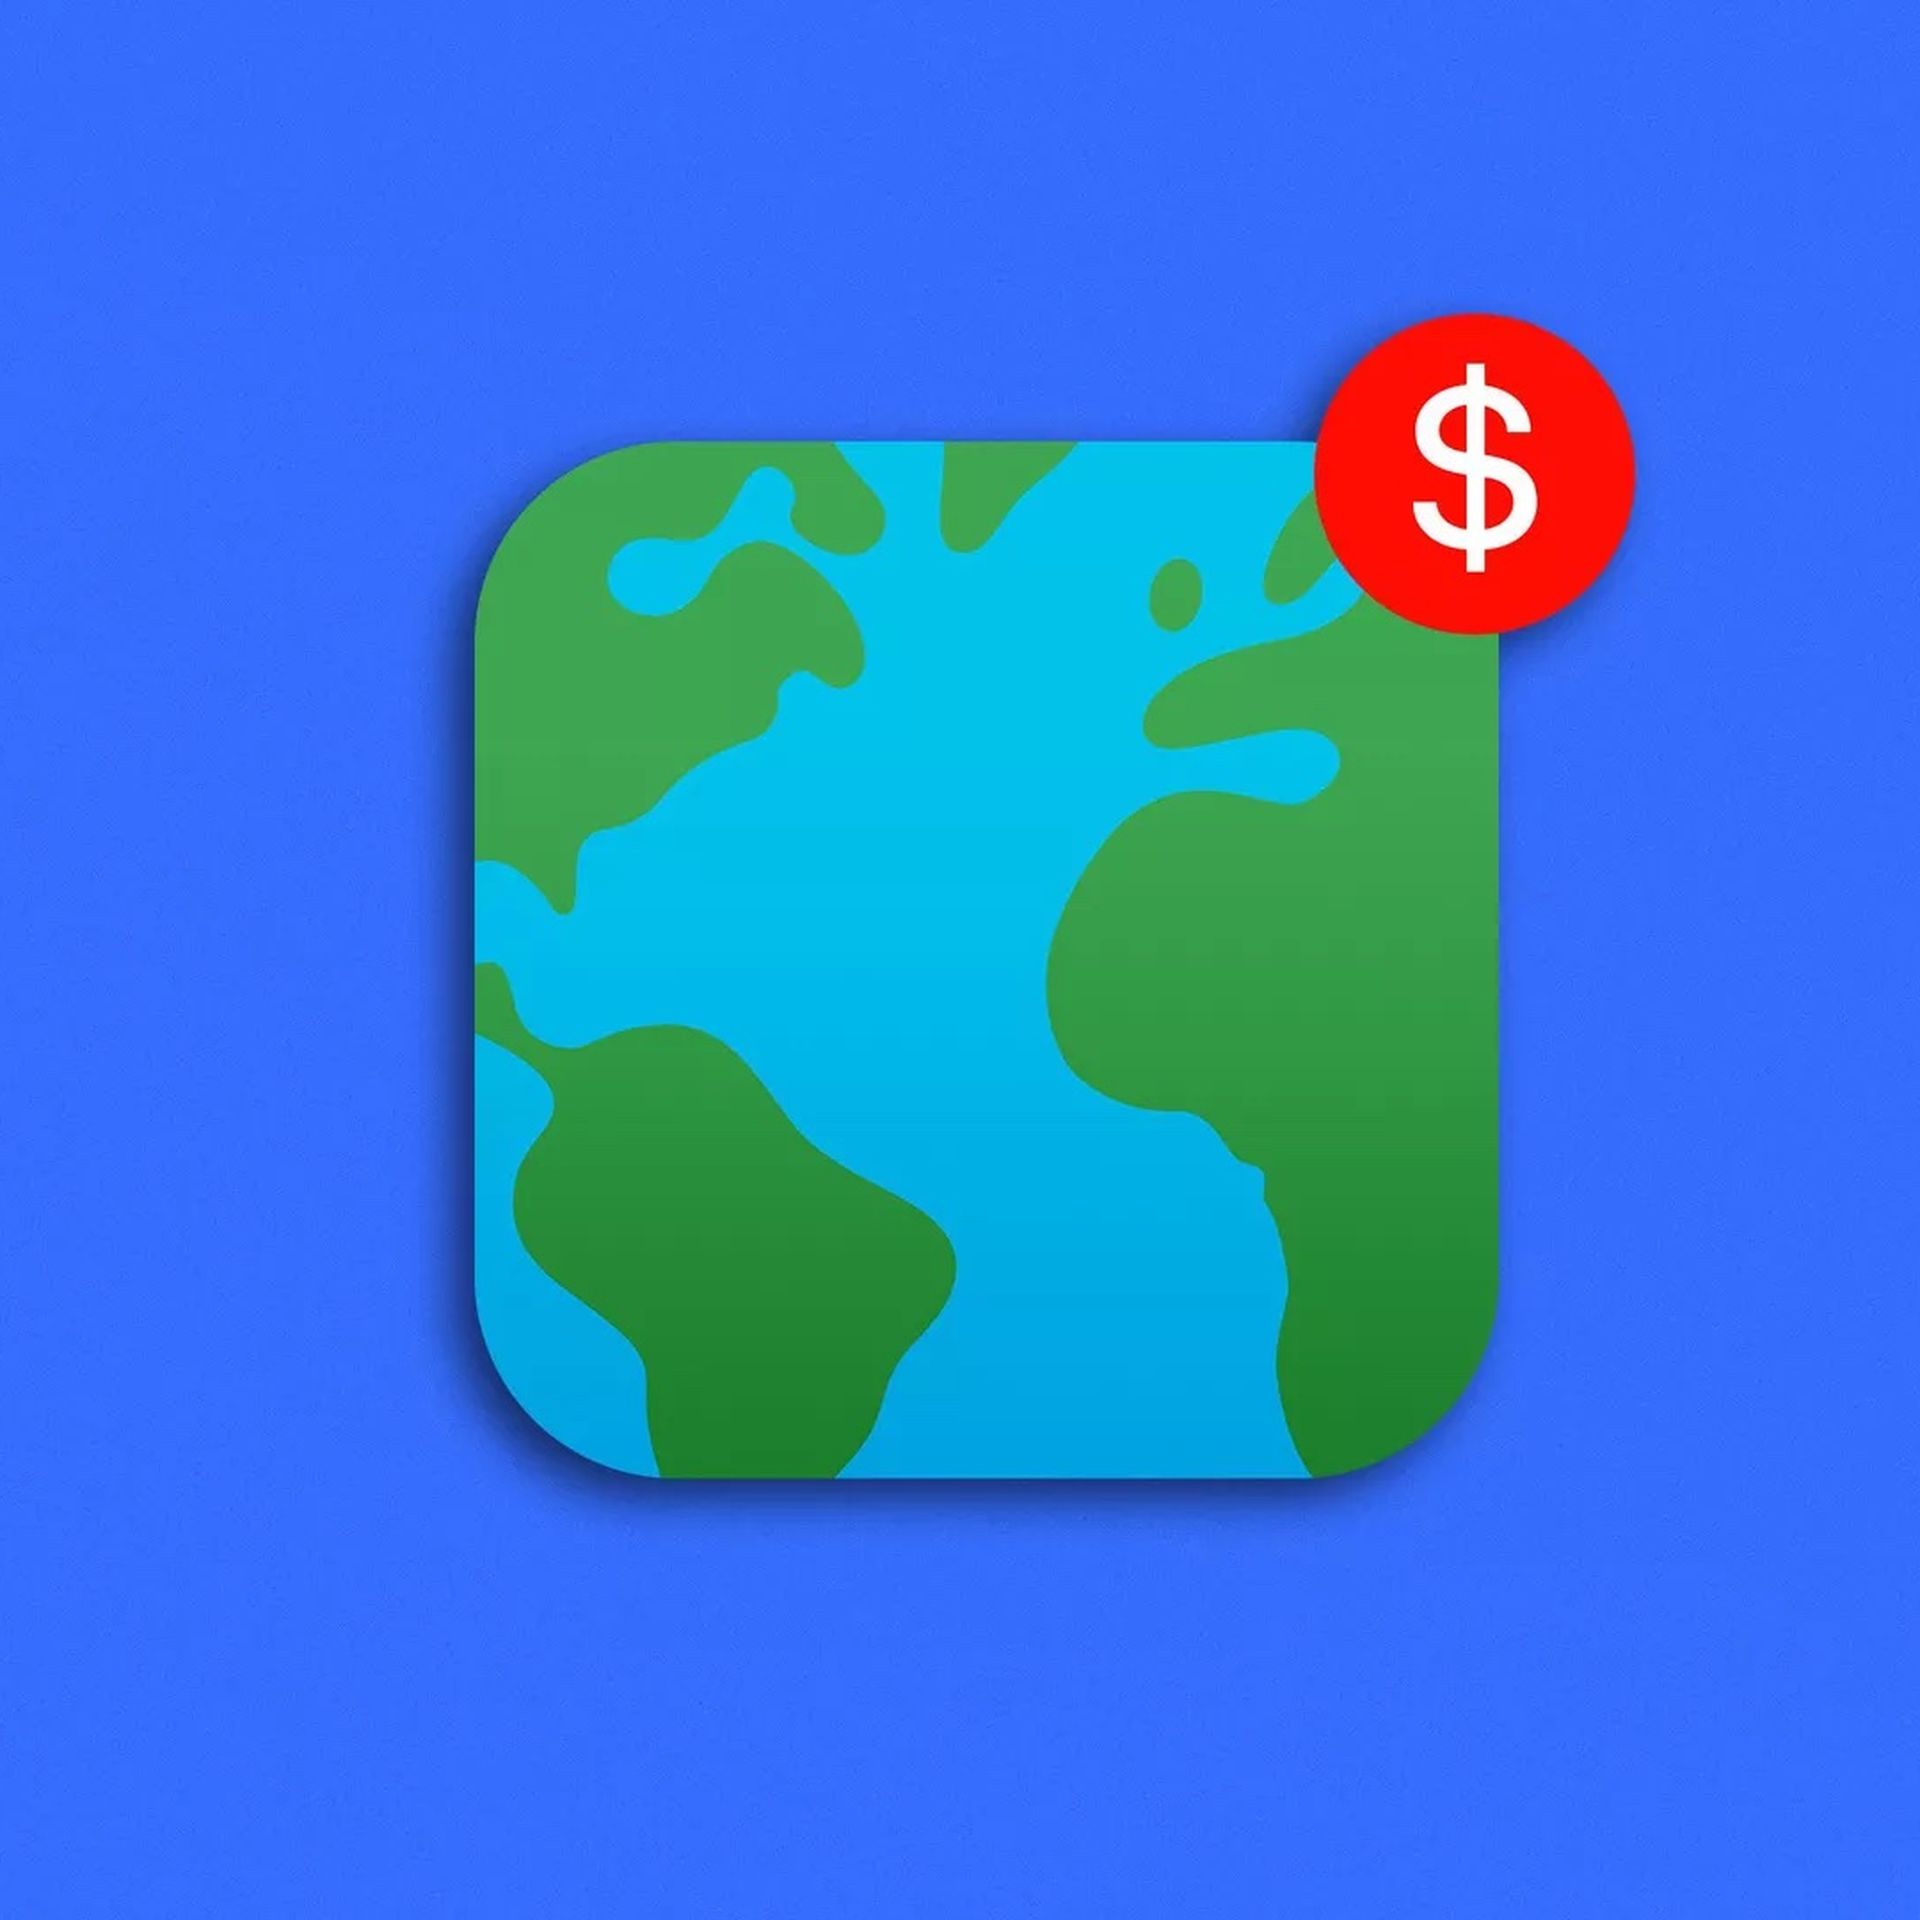 The world as an app with a money sign update icon